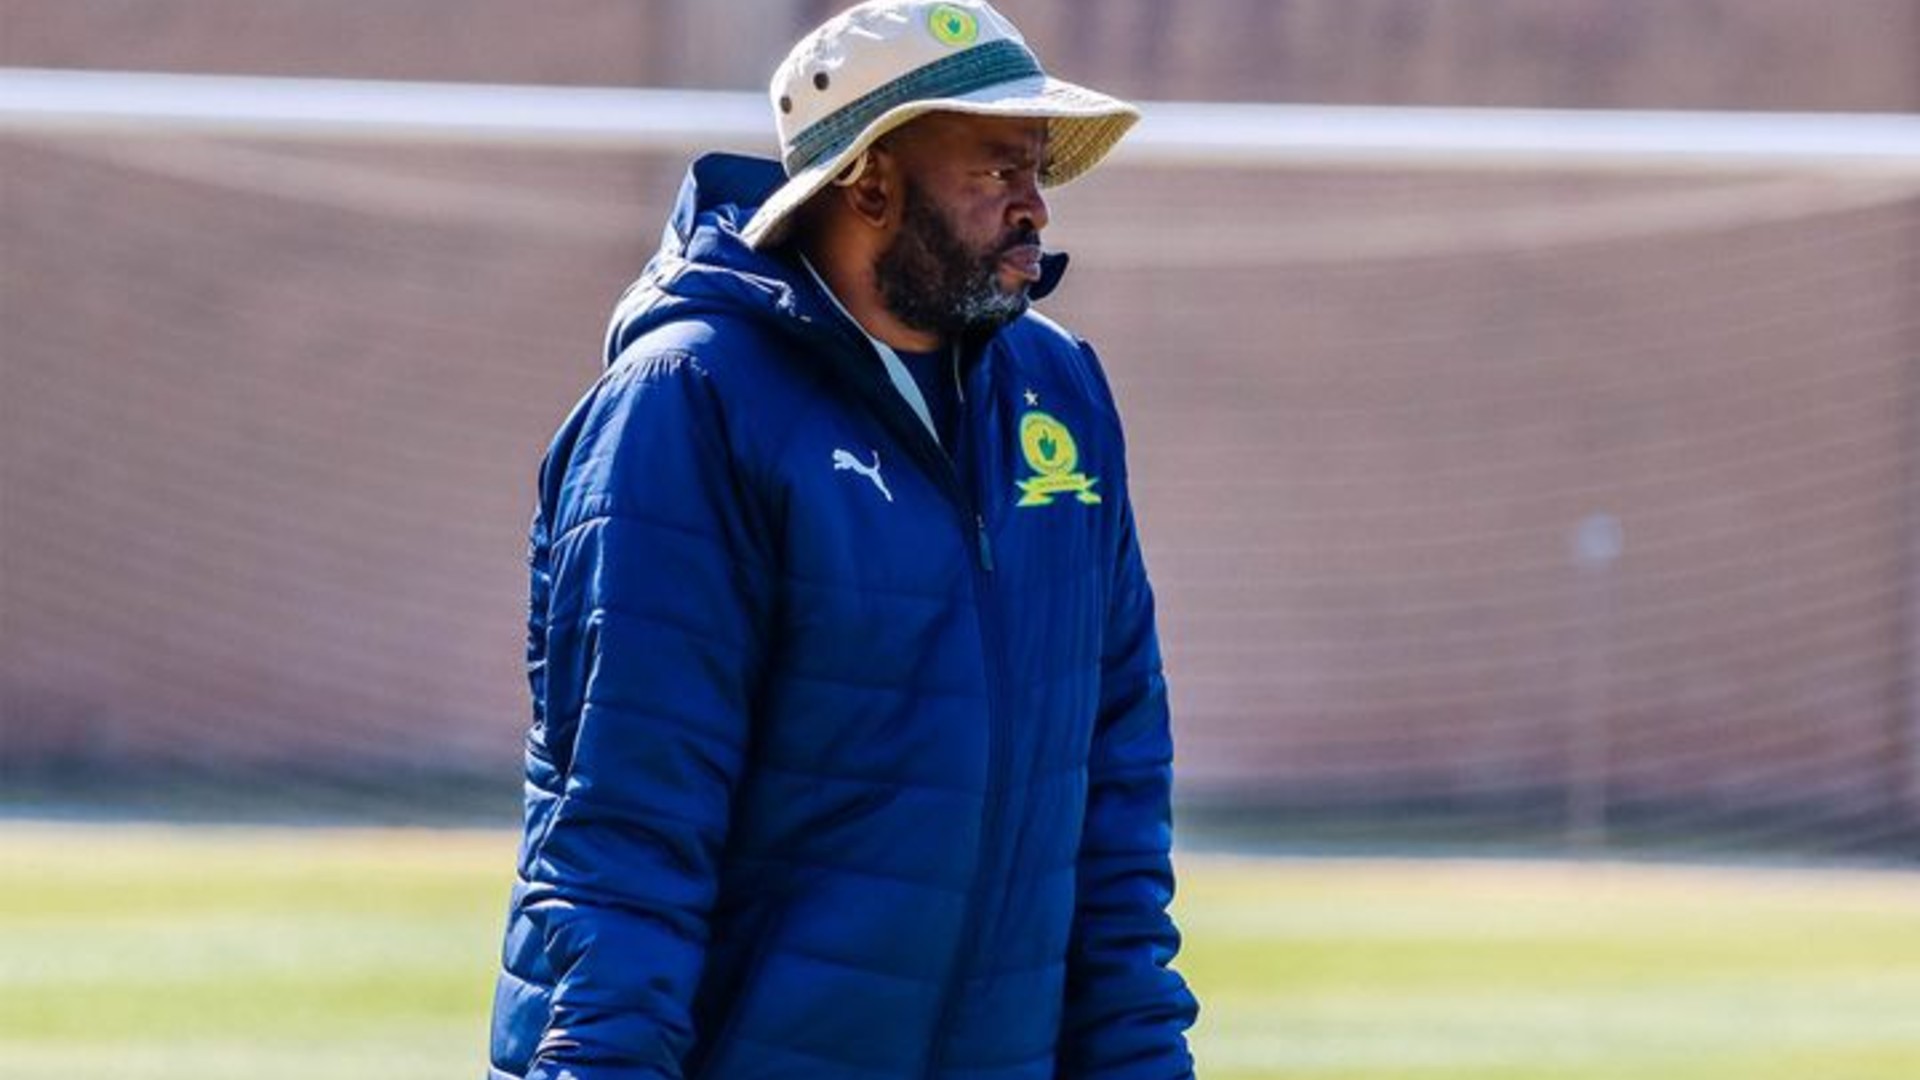 Mamelodi Sundowns didn't want to rely on away goal vs Golden Arrows - Mngqithi